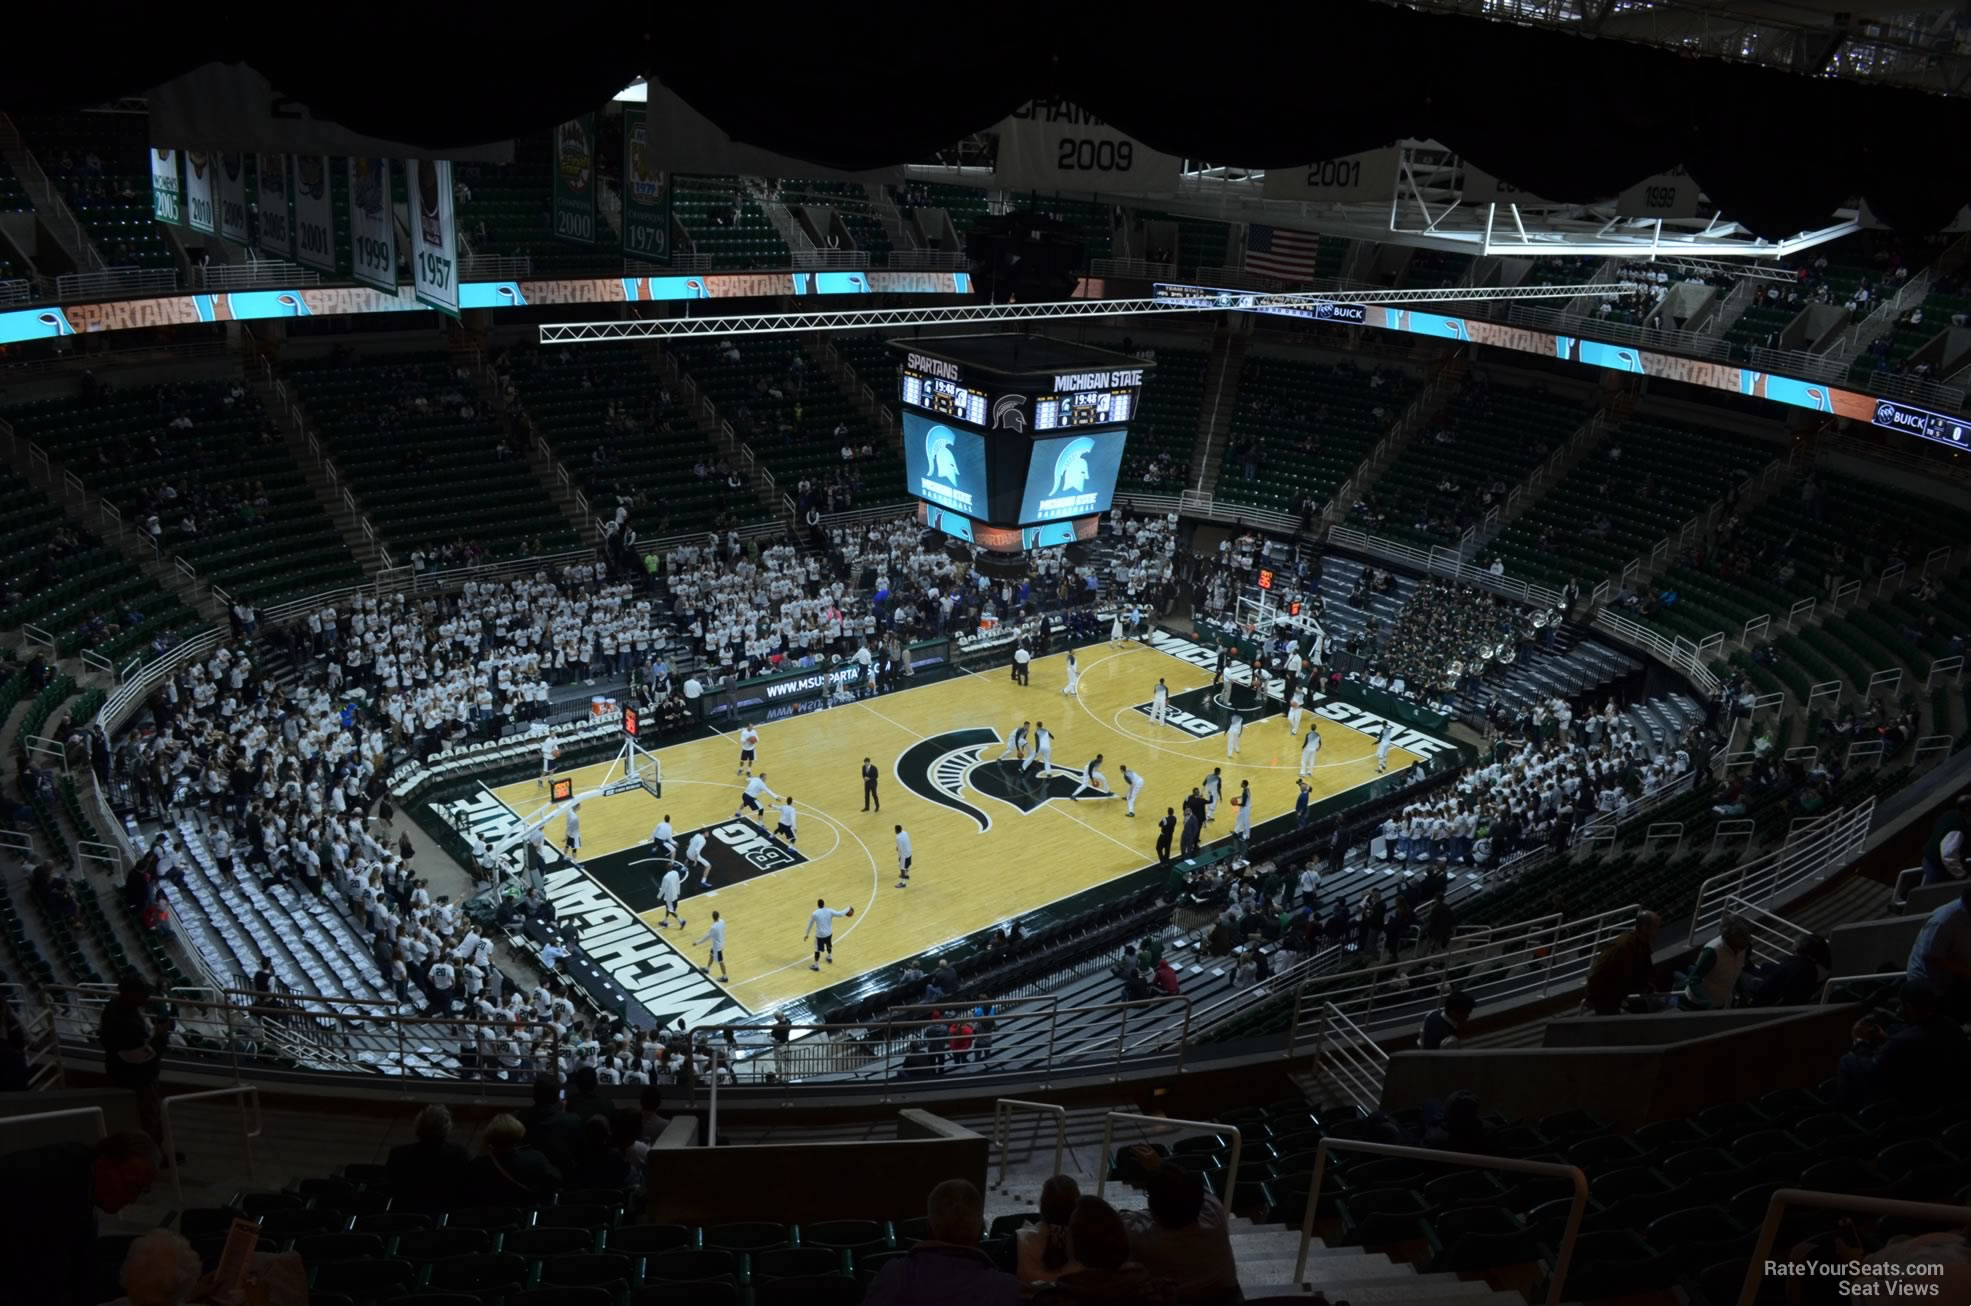 section 231, row 15 seat view  - breslin center